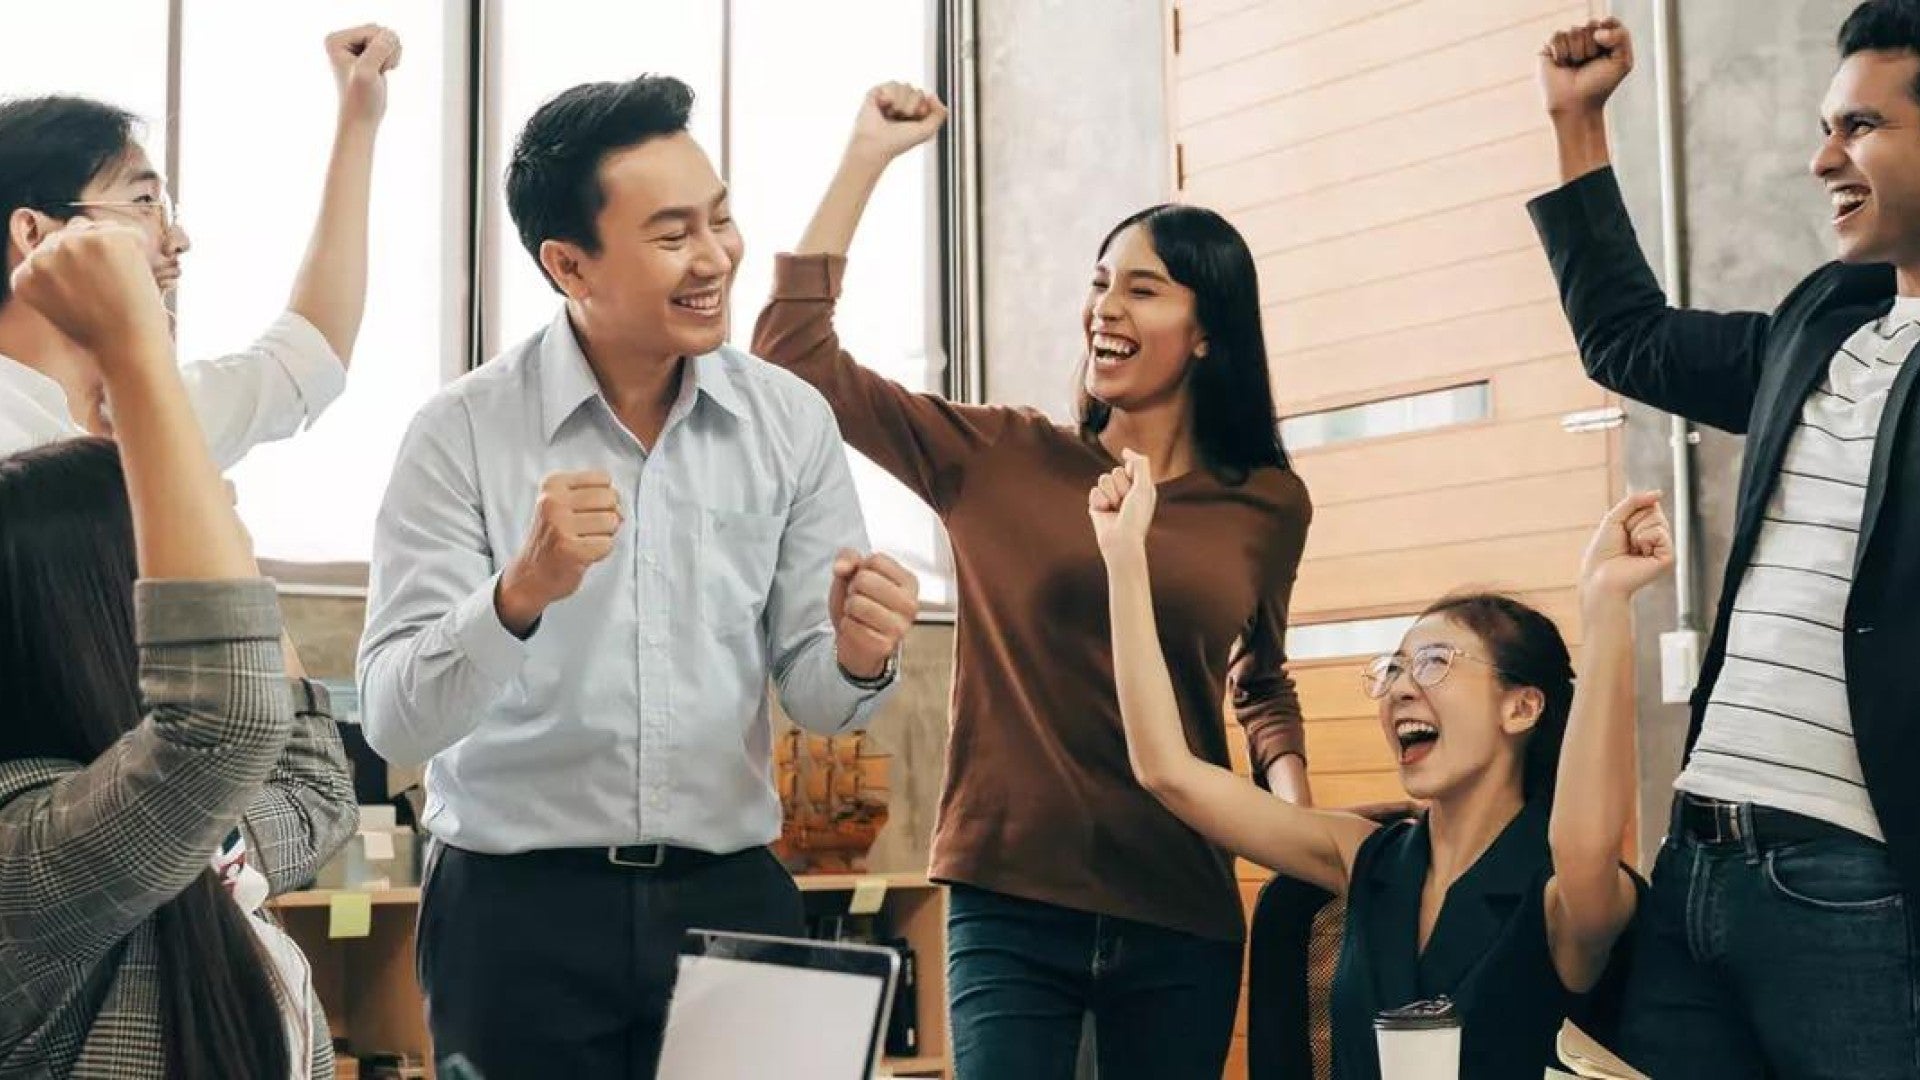 Smiling employees in an office raise their arms in celebration.